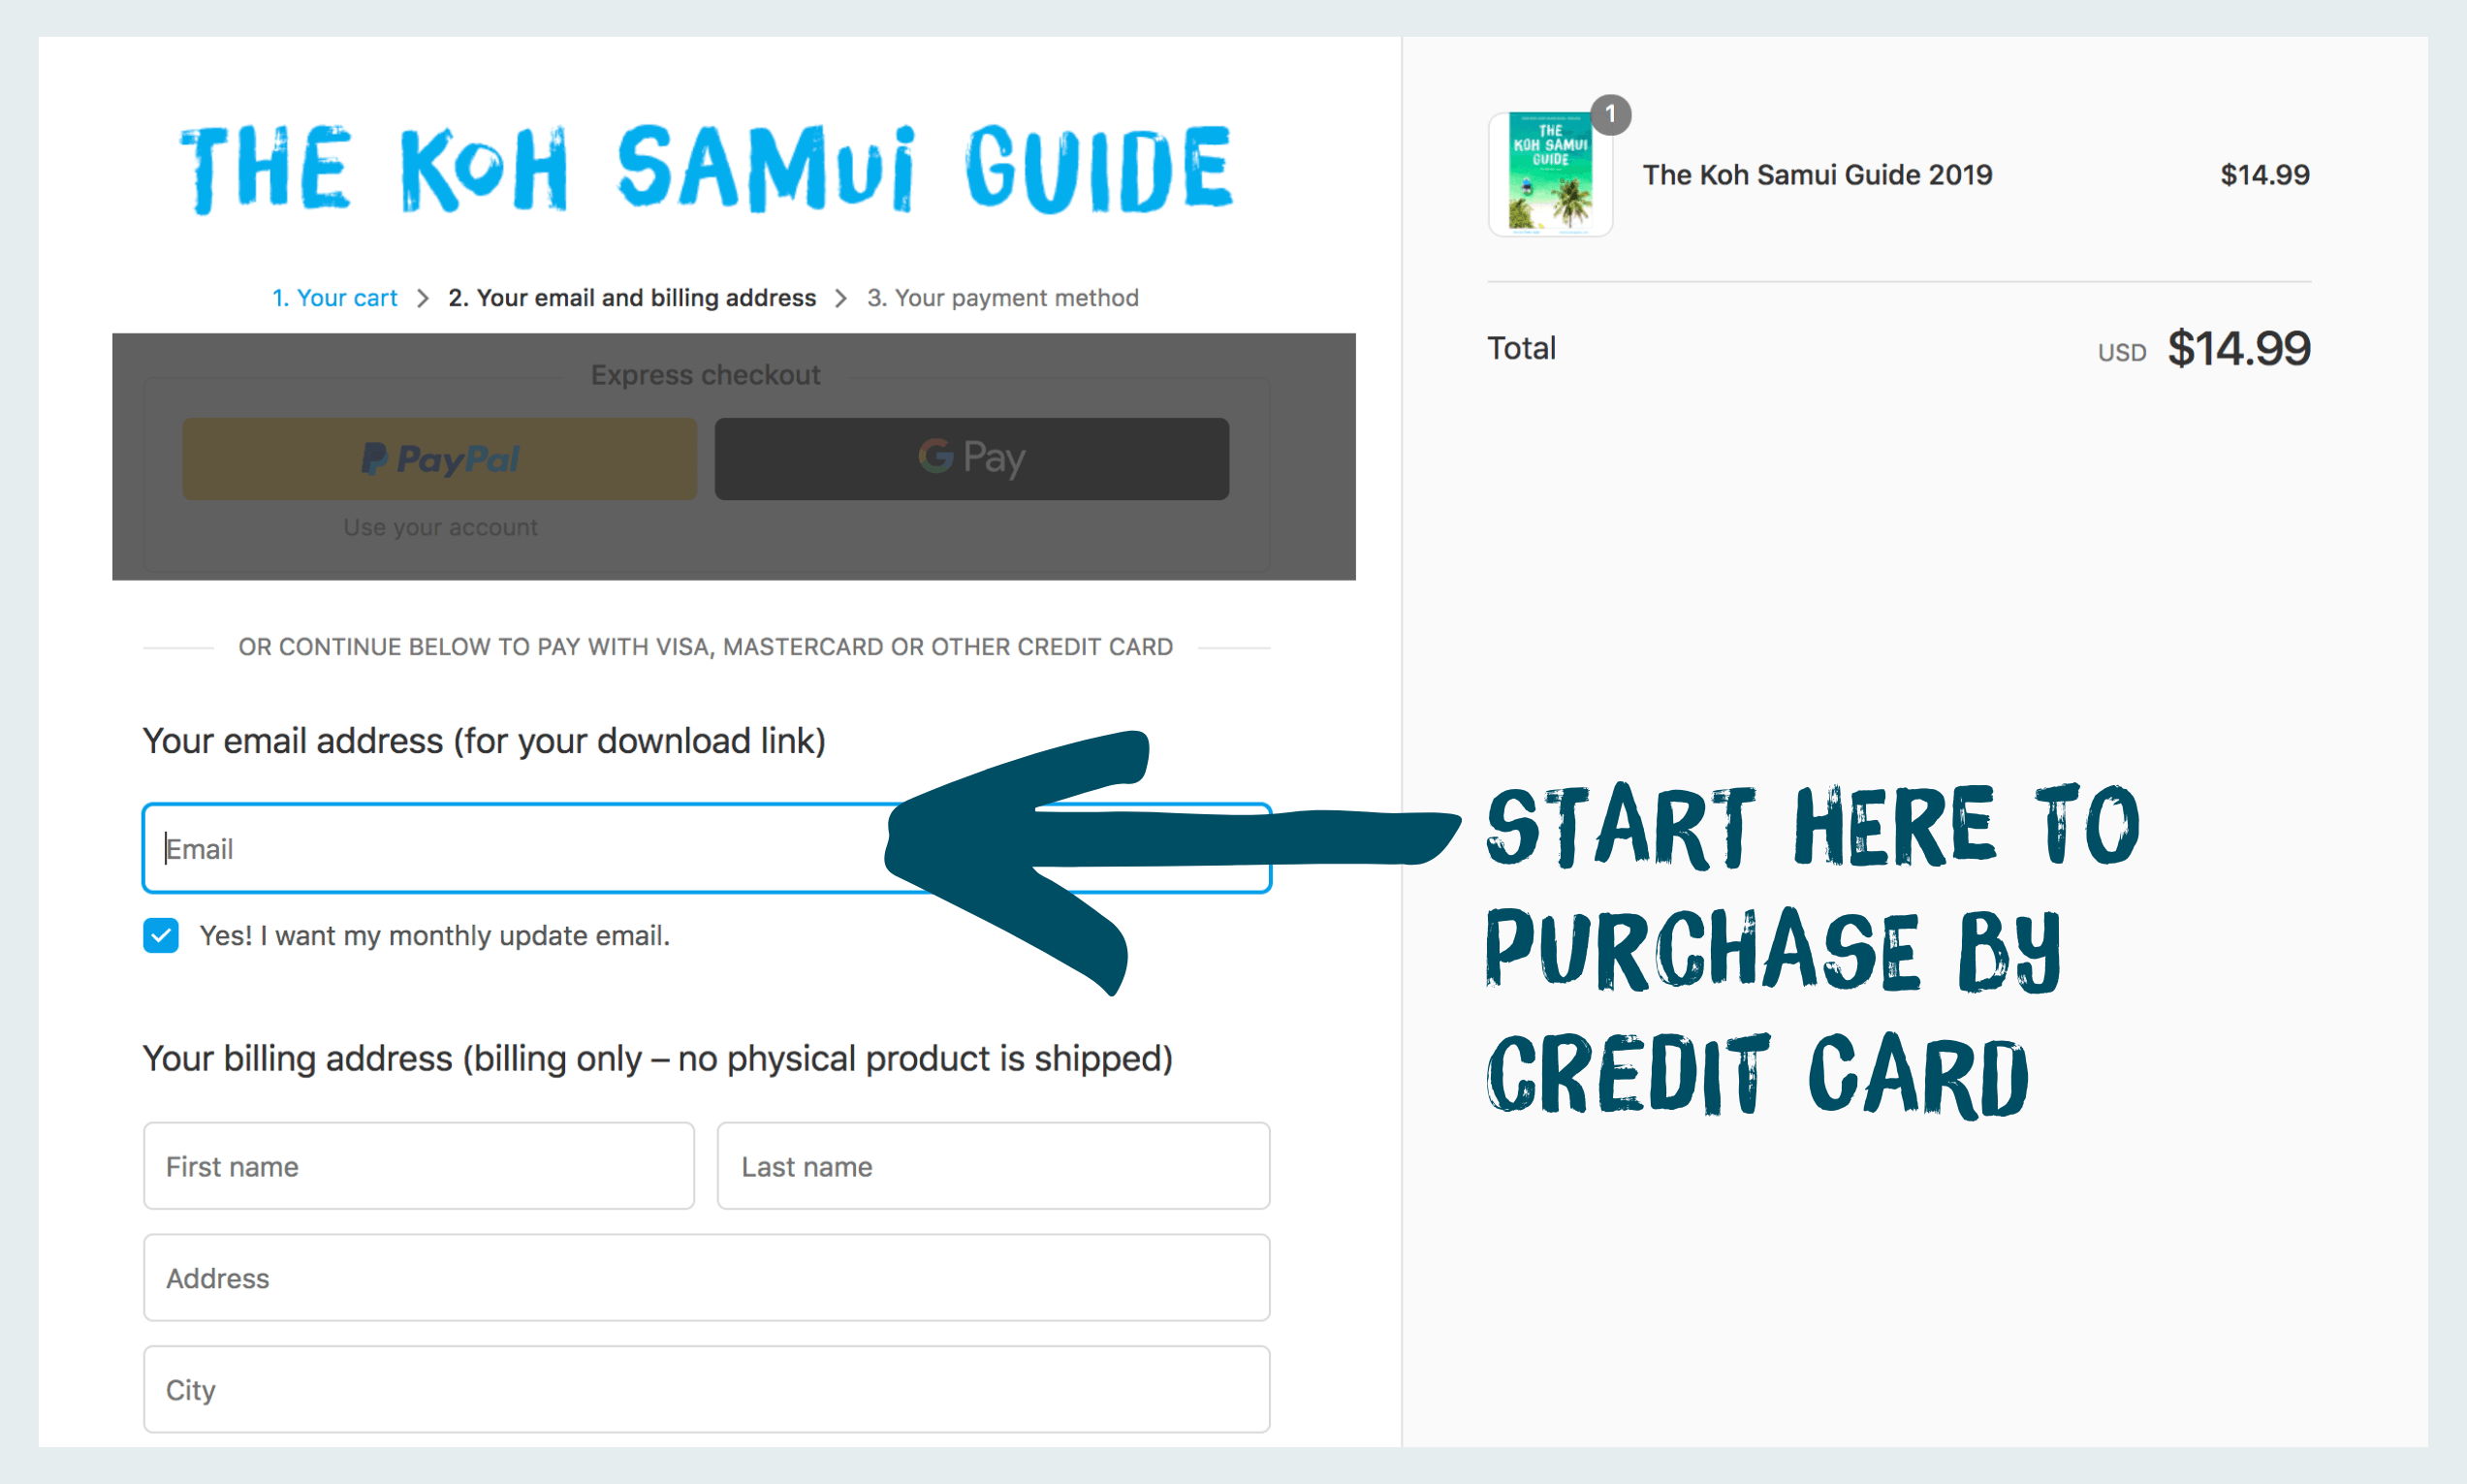 Step-by-step instructions for how to purchase The Koh Samui Guide with a credit card: Step one – enter your email address